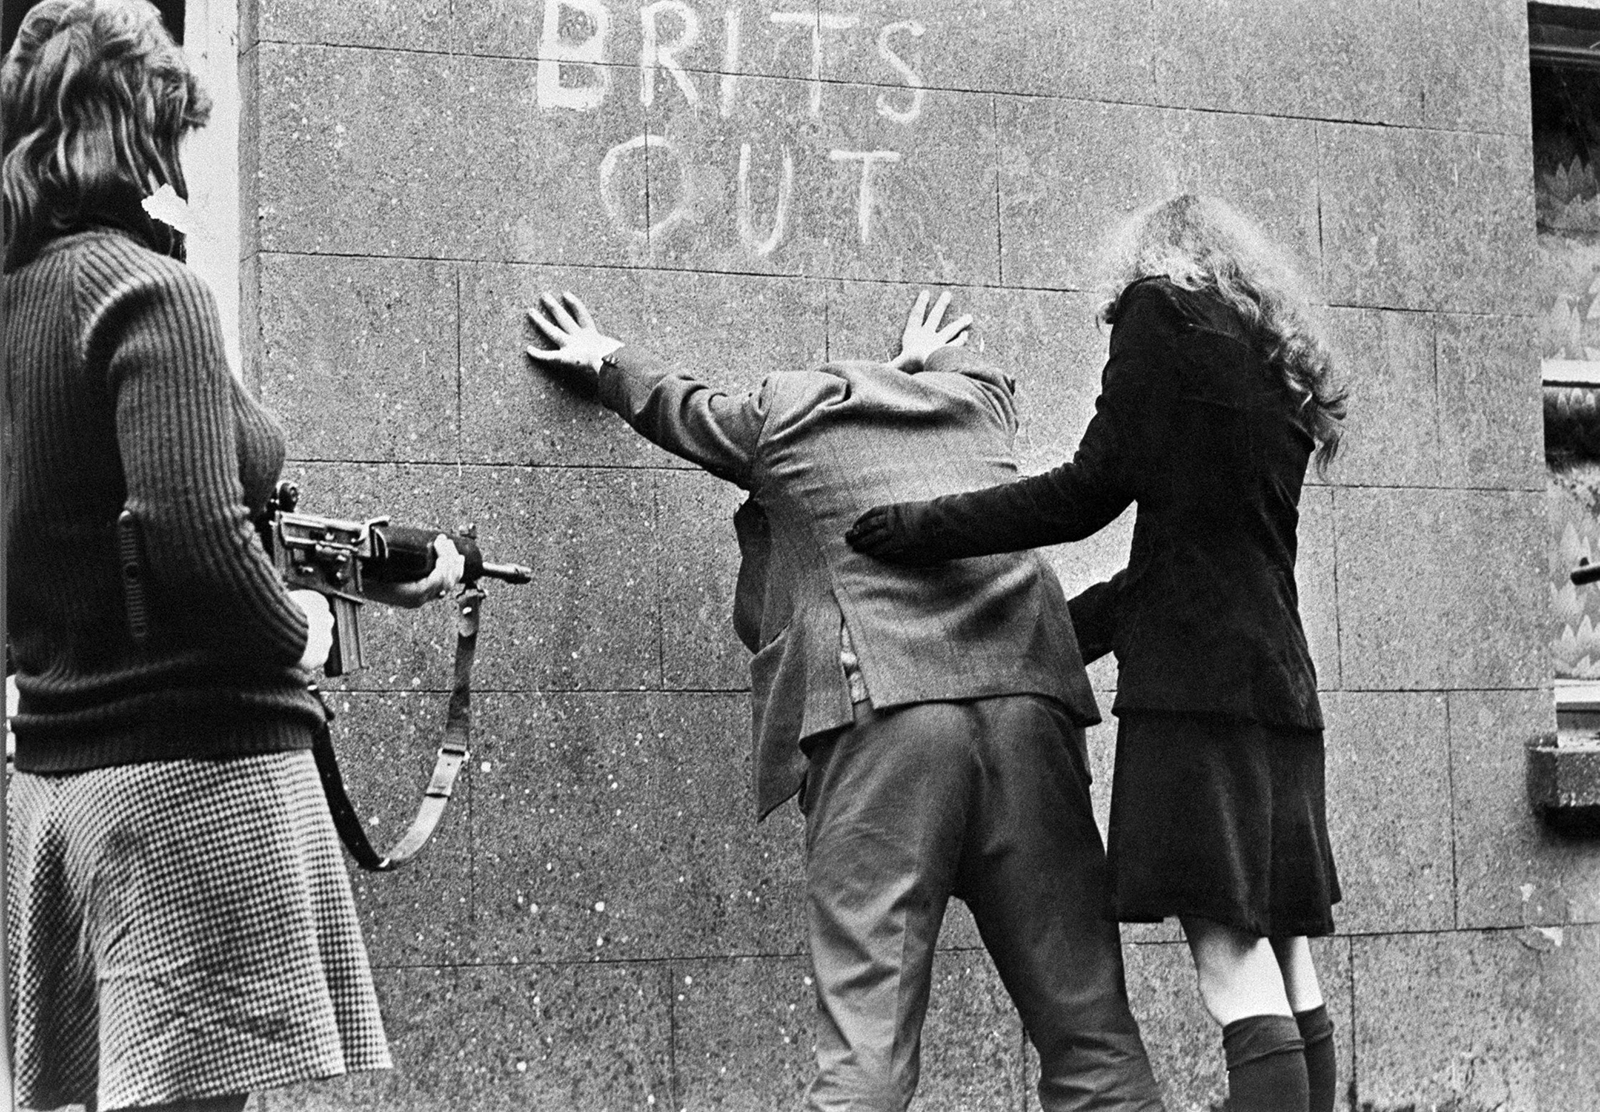 IRA girls searching a man, location and year unknown.